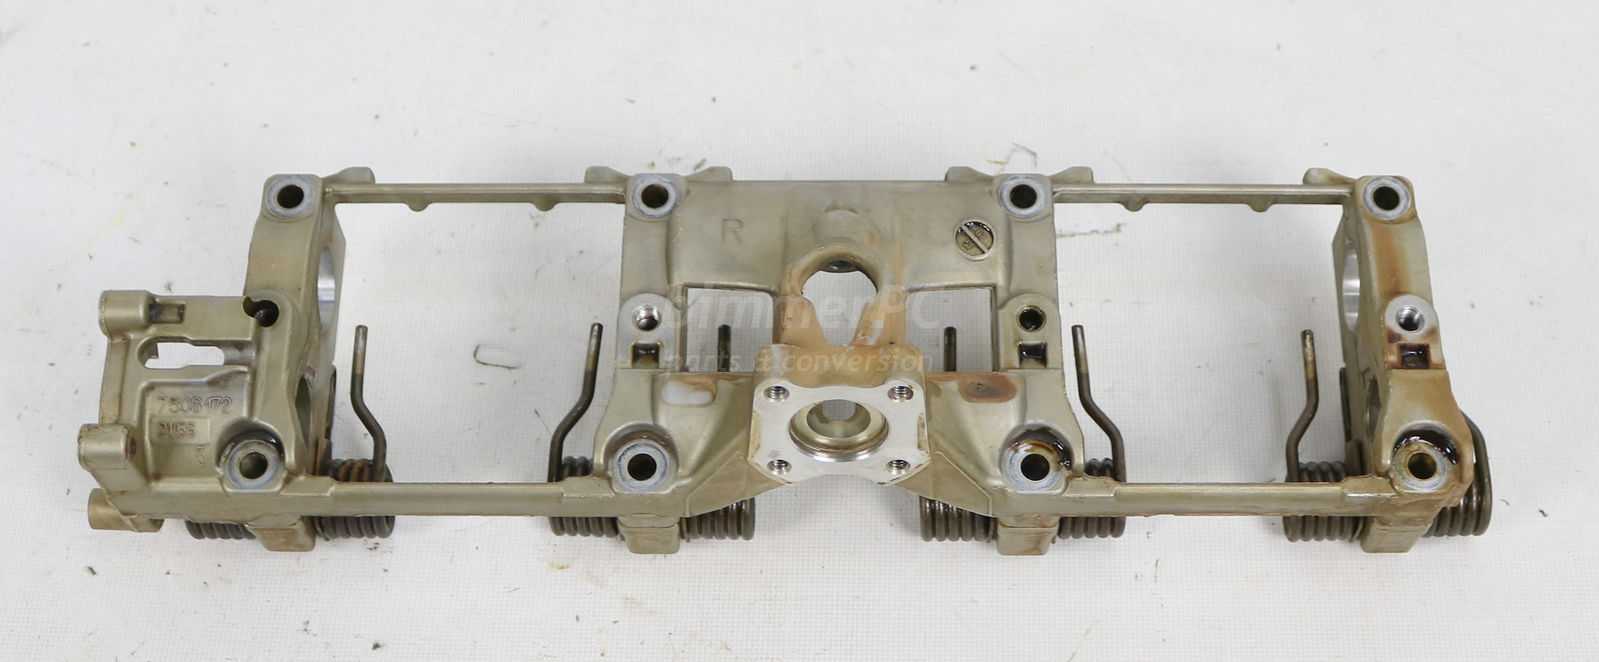 Picture of BMW  Cylinder Head Valvetronic Cam Tray Carrier N62n V8 Bank 2 Cyl 5-8 E60 E63 E64 E65 E66 E70 for sale